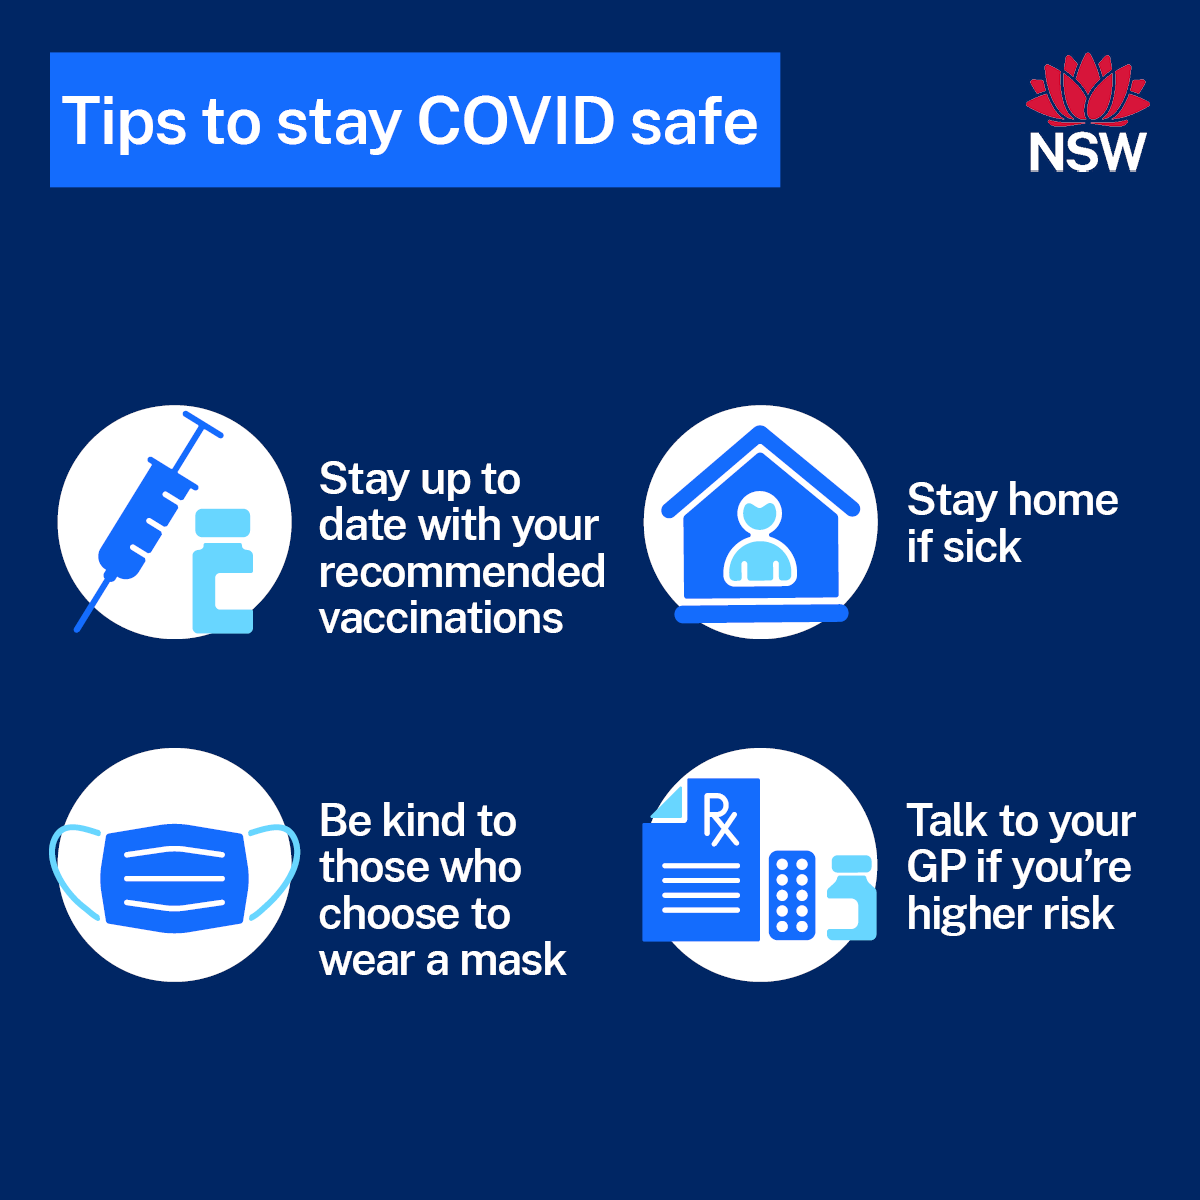 COVID-19 transmission continues to increase in NSW, with community transmission now moderate to high. Do you need to refresh your COVID-safe behaviours to stop the spread of illness and protect others?